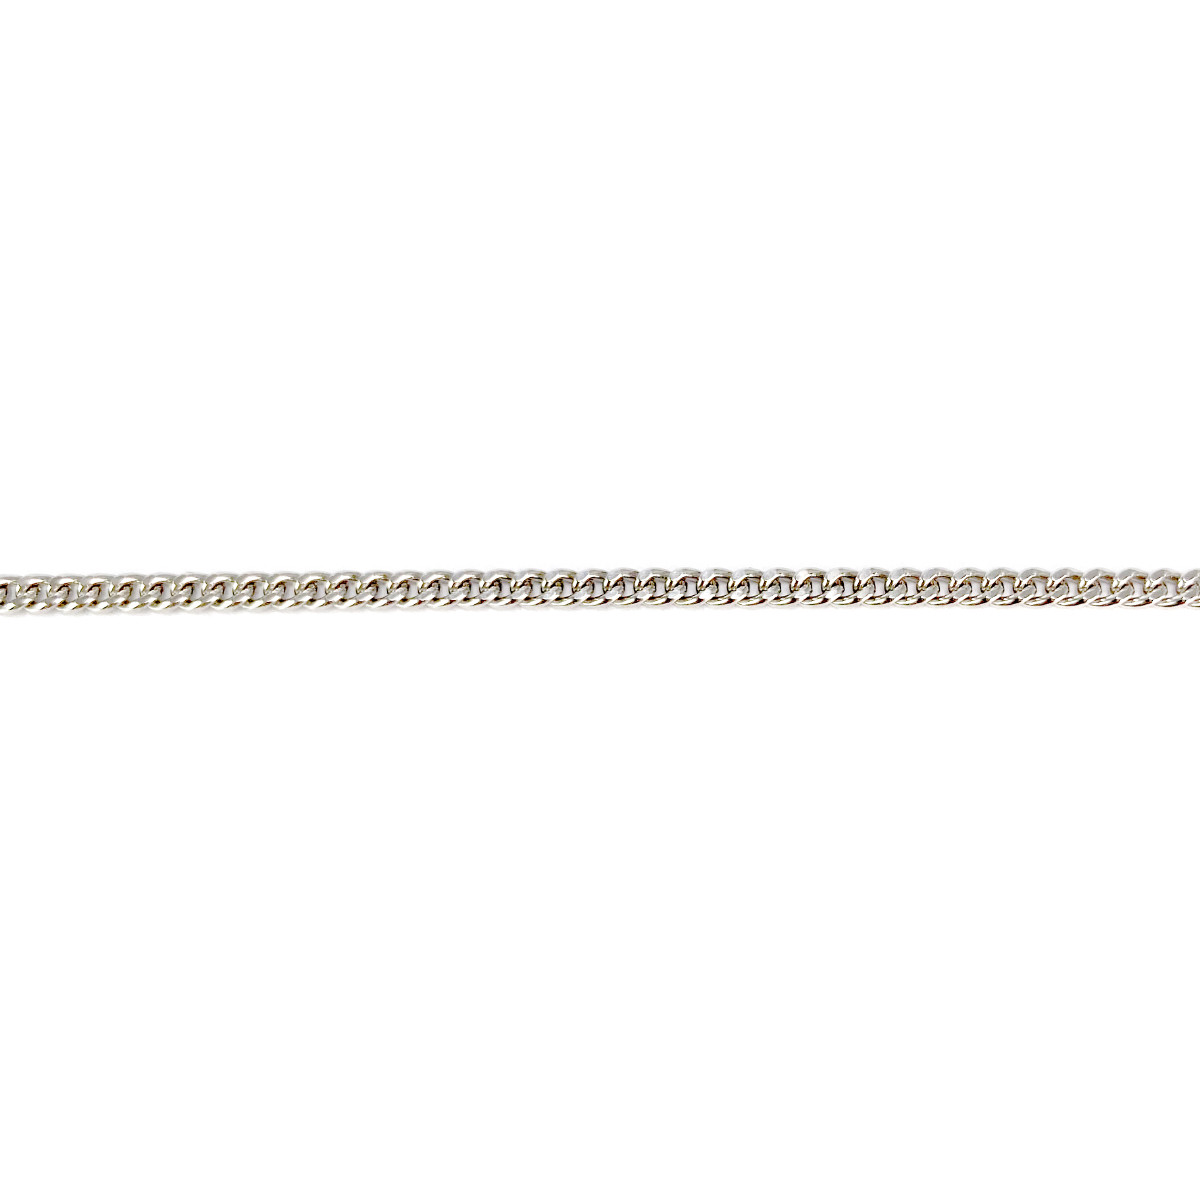 Collier d'occasion maille gourmette or 750 blanc 45,5 cm - vue 3